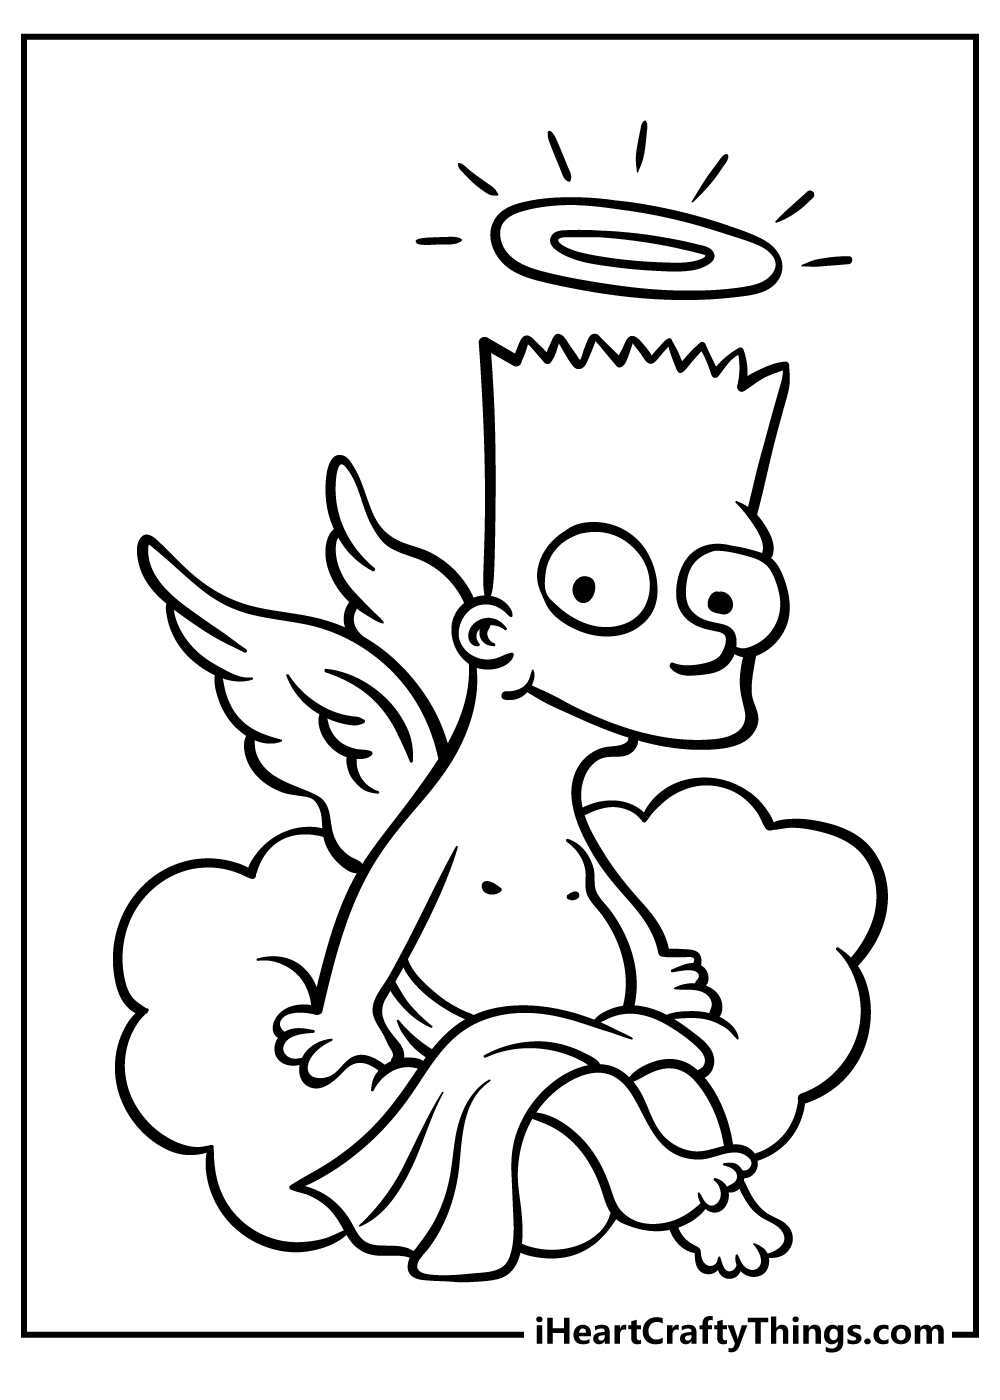 Simpsons coloring pages free printables